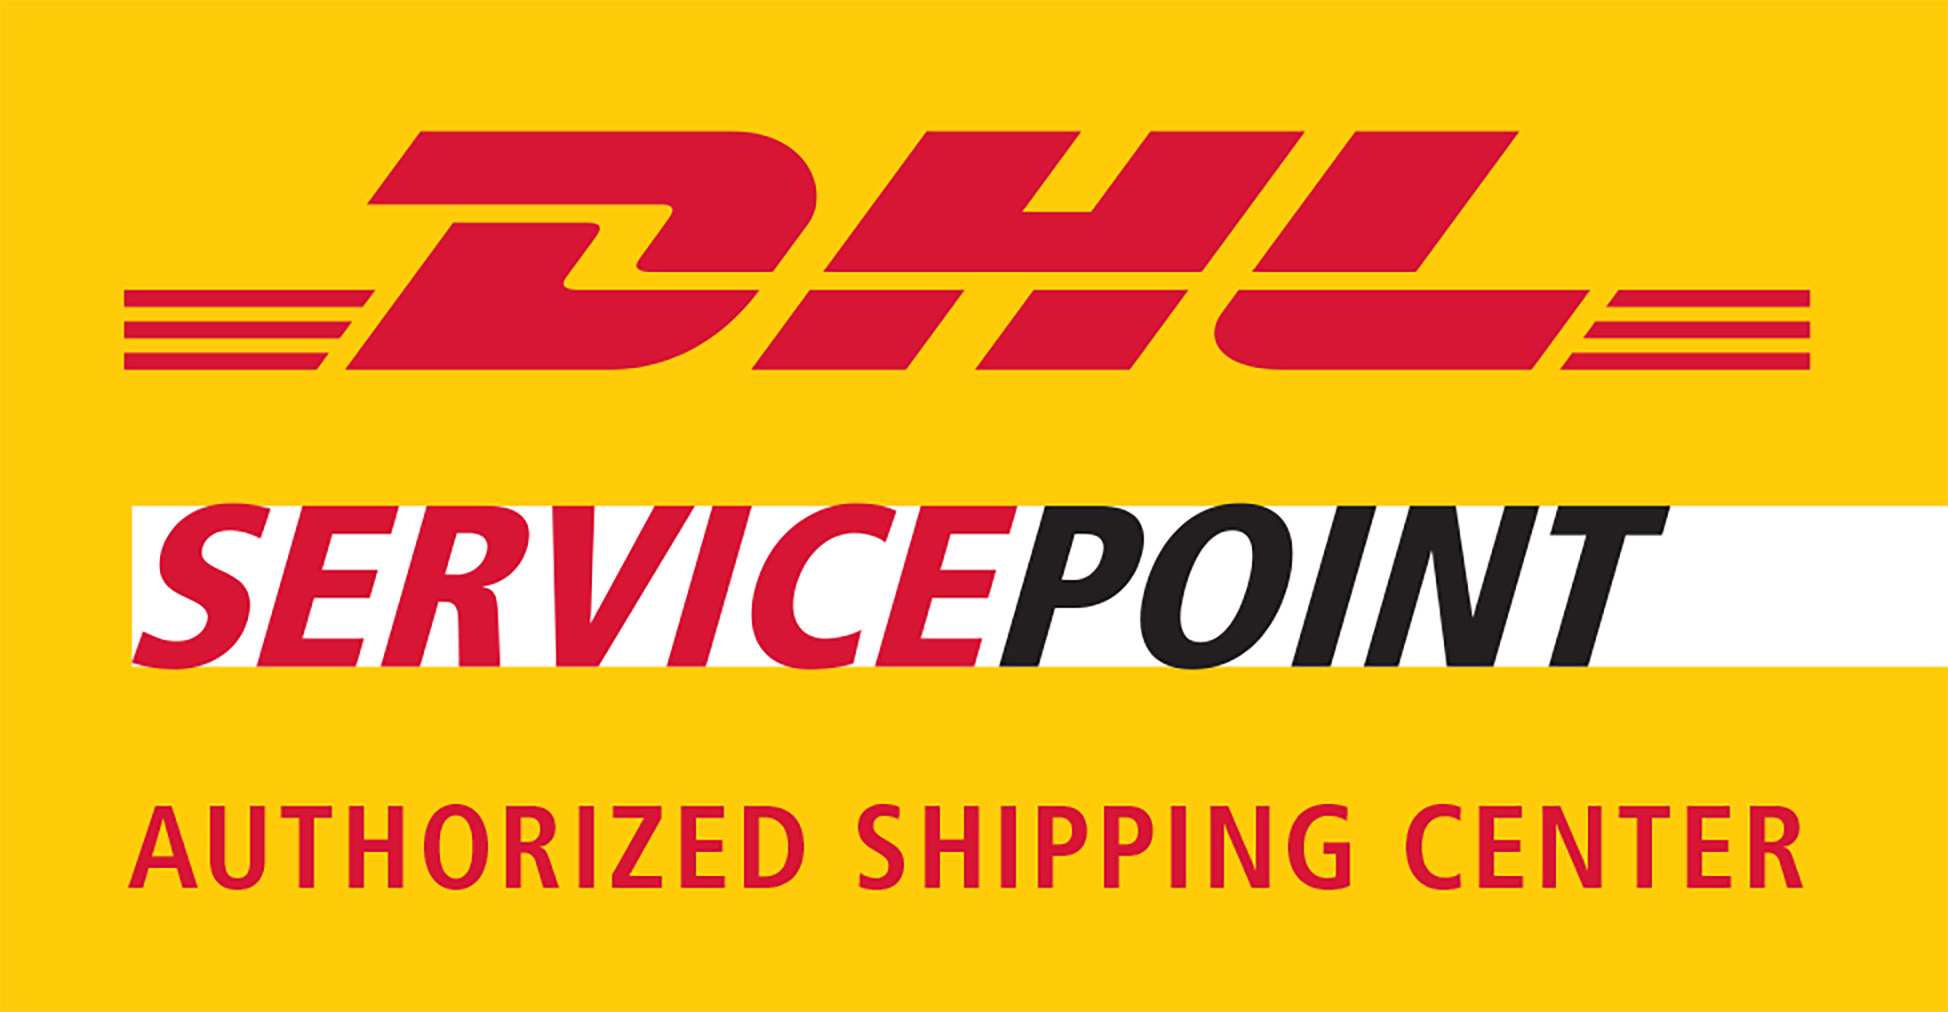 Portsmouth NH DHL Express Shipping Services | Parcel RoomParcel Room